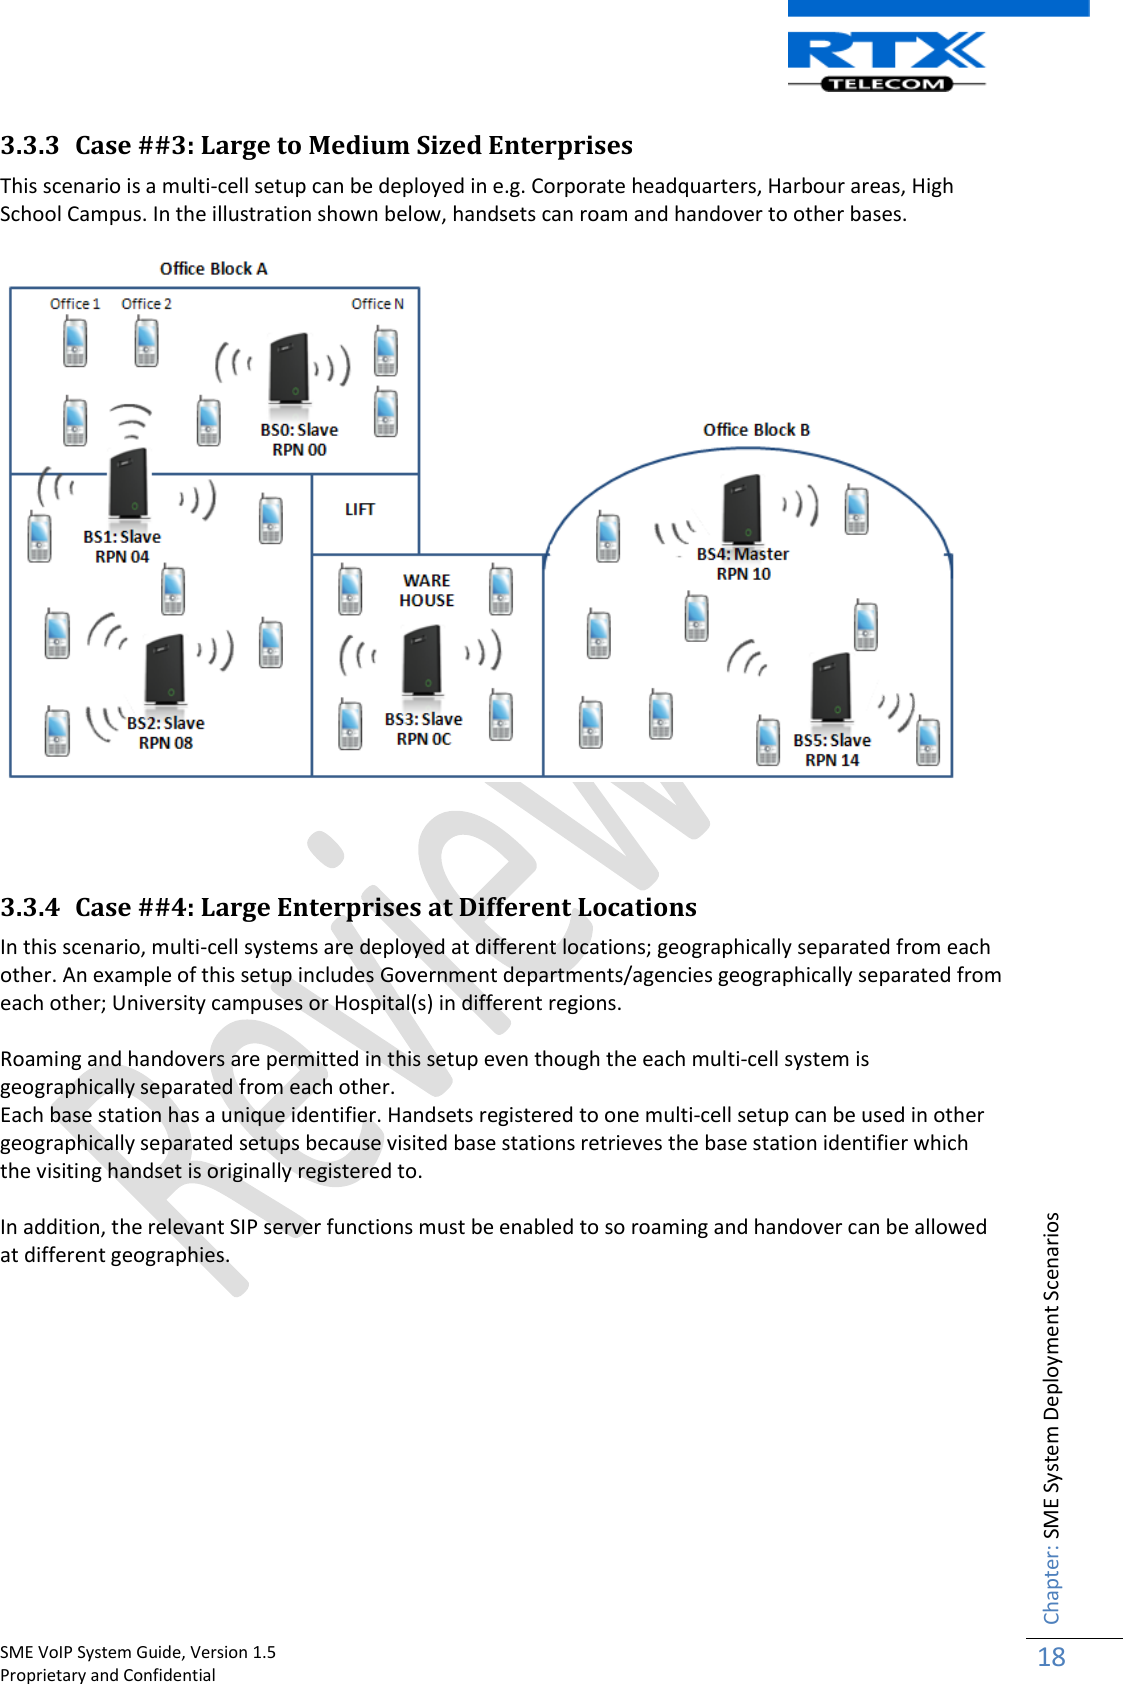    SME VoIP System Guide, Version 1.5                                                                                                                                                          Proprietary and Confidential    Chapter: SME System Deployment Scenarios 18  3.3.3 Case ##3: Large to Medium Sized Enterprises This scenario is a multi-cell setup can be deployed in e.g. Corporate headquarters, Harbour areas, High School Campus. In the illustration shown below, handsets can roam and handover to other bases.      3.3.4 Case ##4: Large Enterprises at Different Locations In this scenario, multi-cell systems are deployed at different locations; geographically separated from each other. An example of this setup includes Government departments/agencies geographically separated from each other; University campuses or Hospital(s) in different regions.  Roaming and handovers are permitted in this setup even though the each multi-cell system is geographically separated from each other.  Each base station has a unique identifier. Handsets registered to one multi-cell setup can be used in other geographically separated setups because visited base stations retrieves the base station identifier which the visiting handset is originally registered to.    In addition, the relevant SIP server functions must be enabled to so roaming and handover can be allowed at different geographies.    